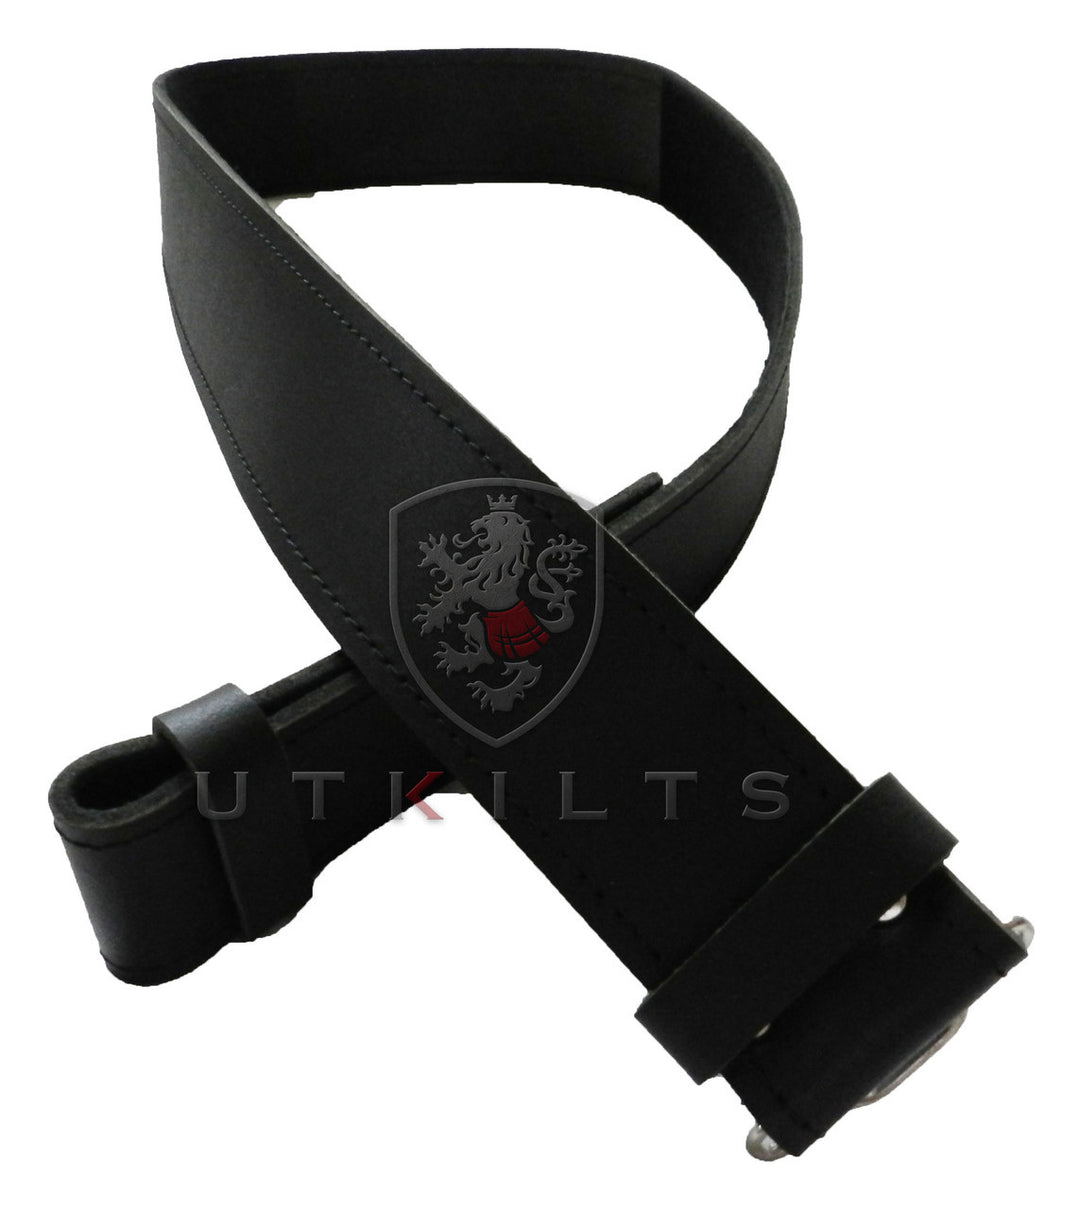 Kilt Buckles and Straps 1.25 Inch Black Leather Straps Metal Buckles  Replacement Strap and Buckle 